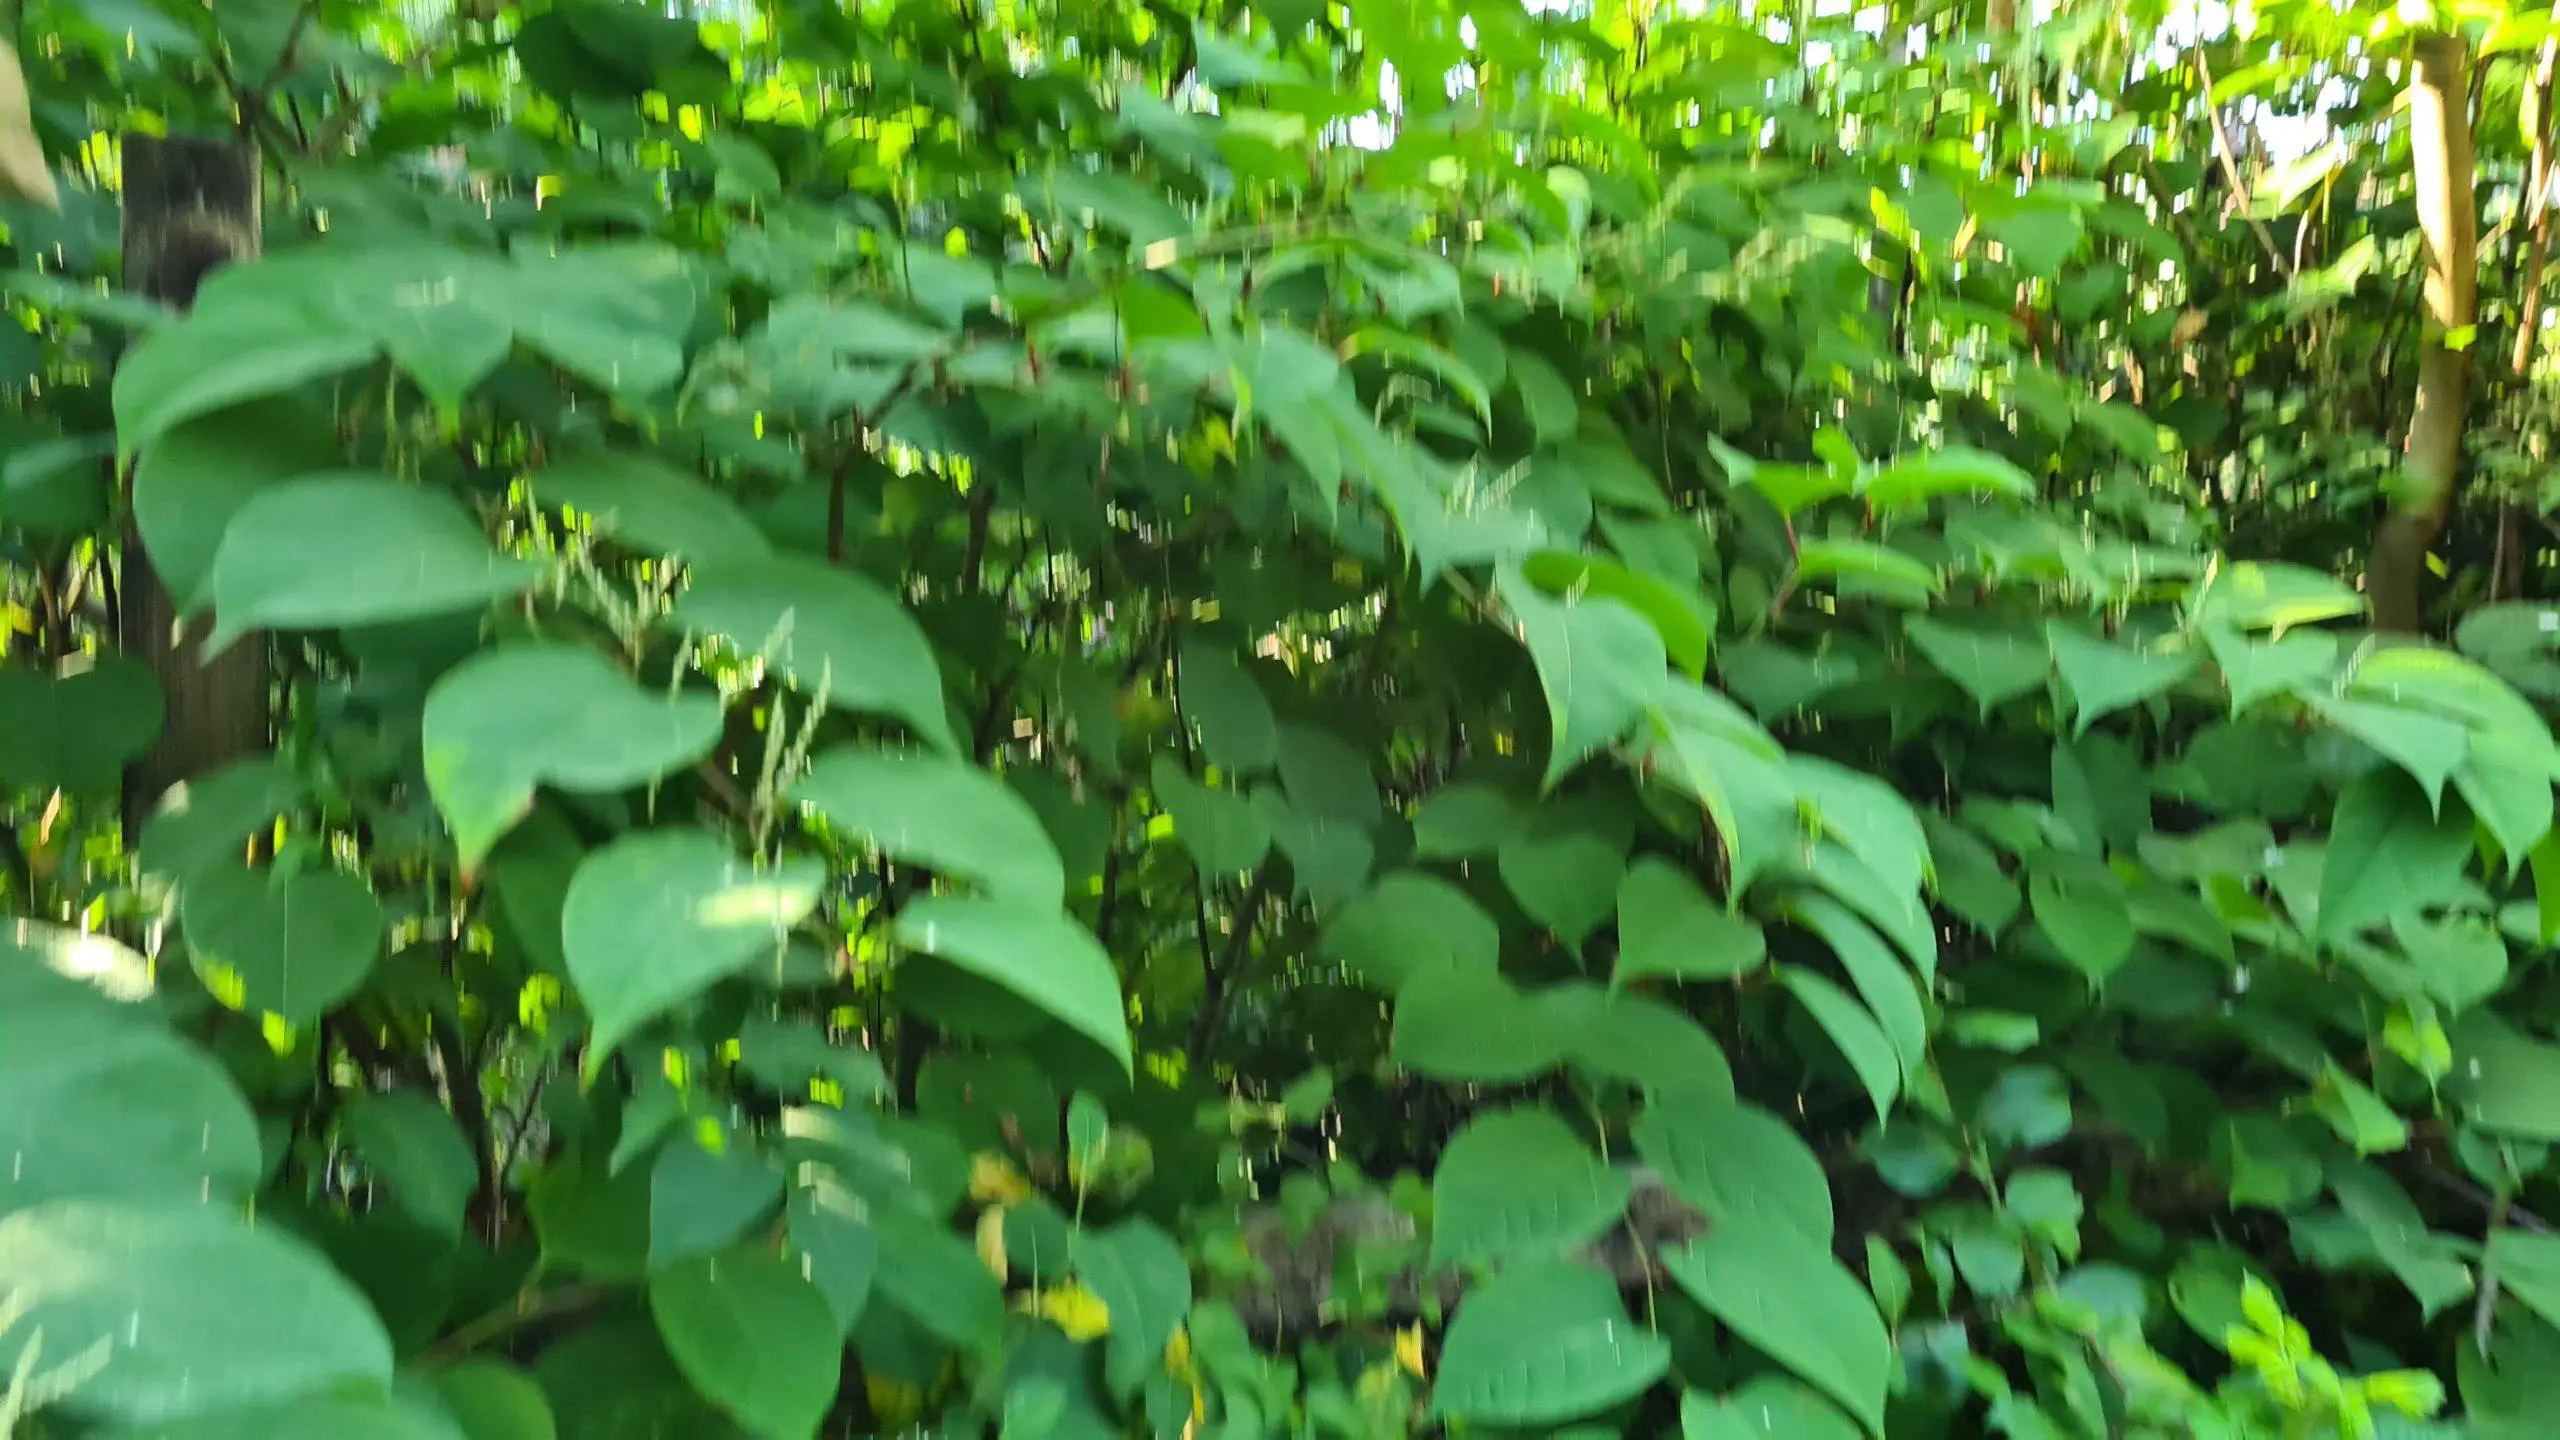 With its large leaves and rapid growth Japanese knotweed consumes an area quickly